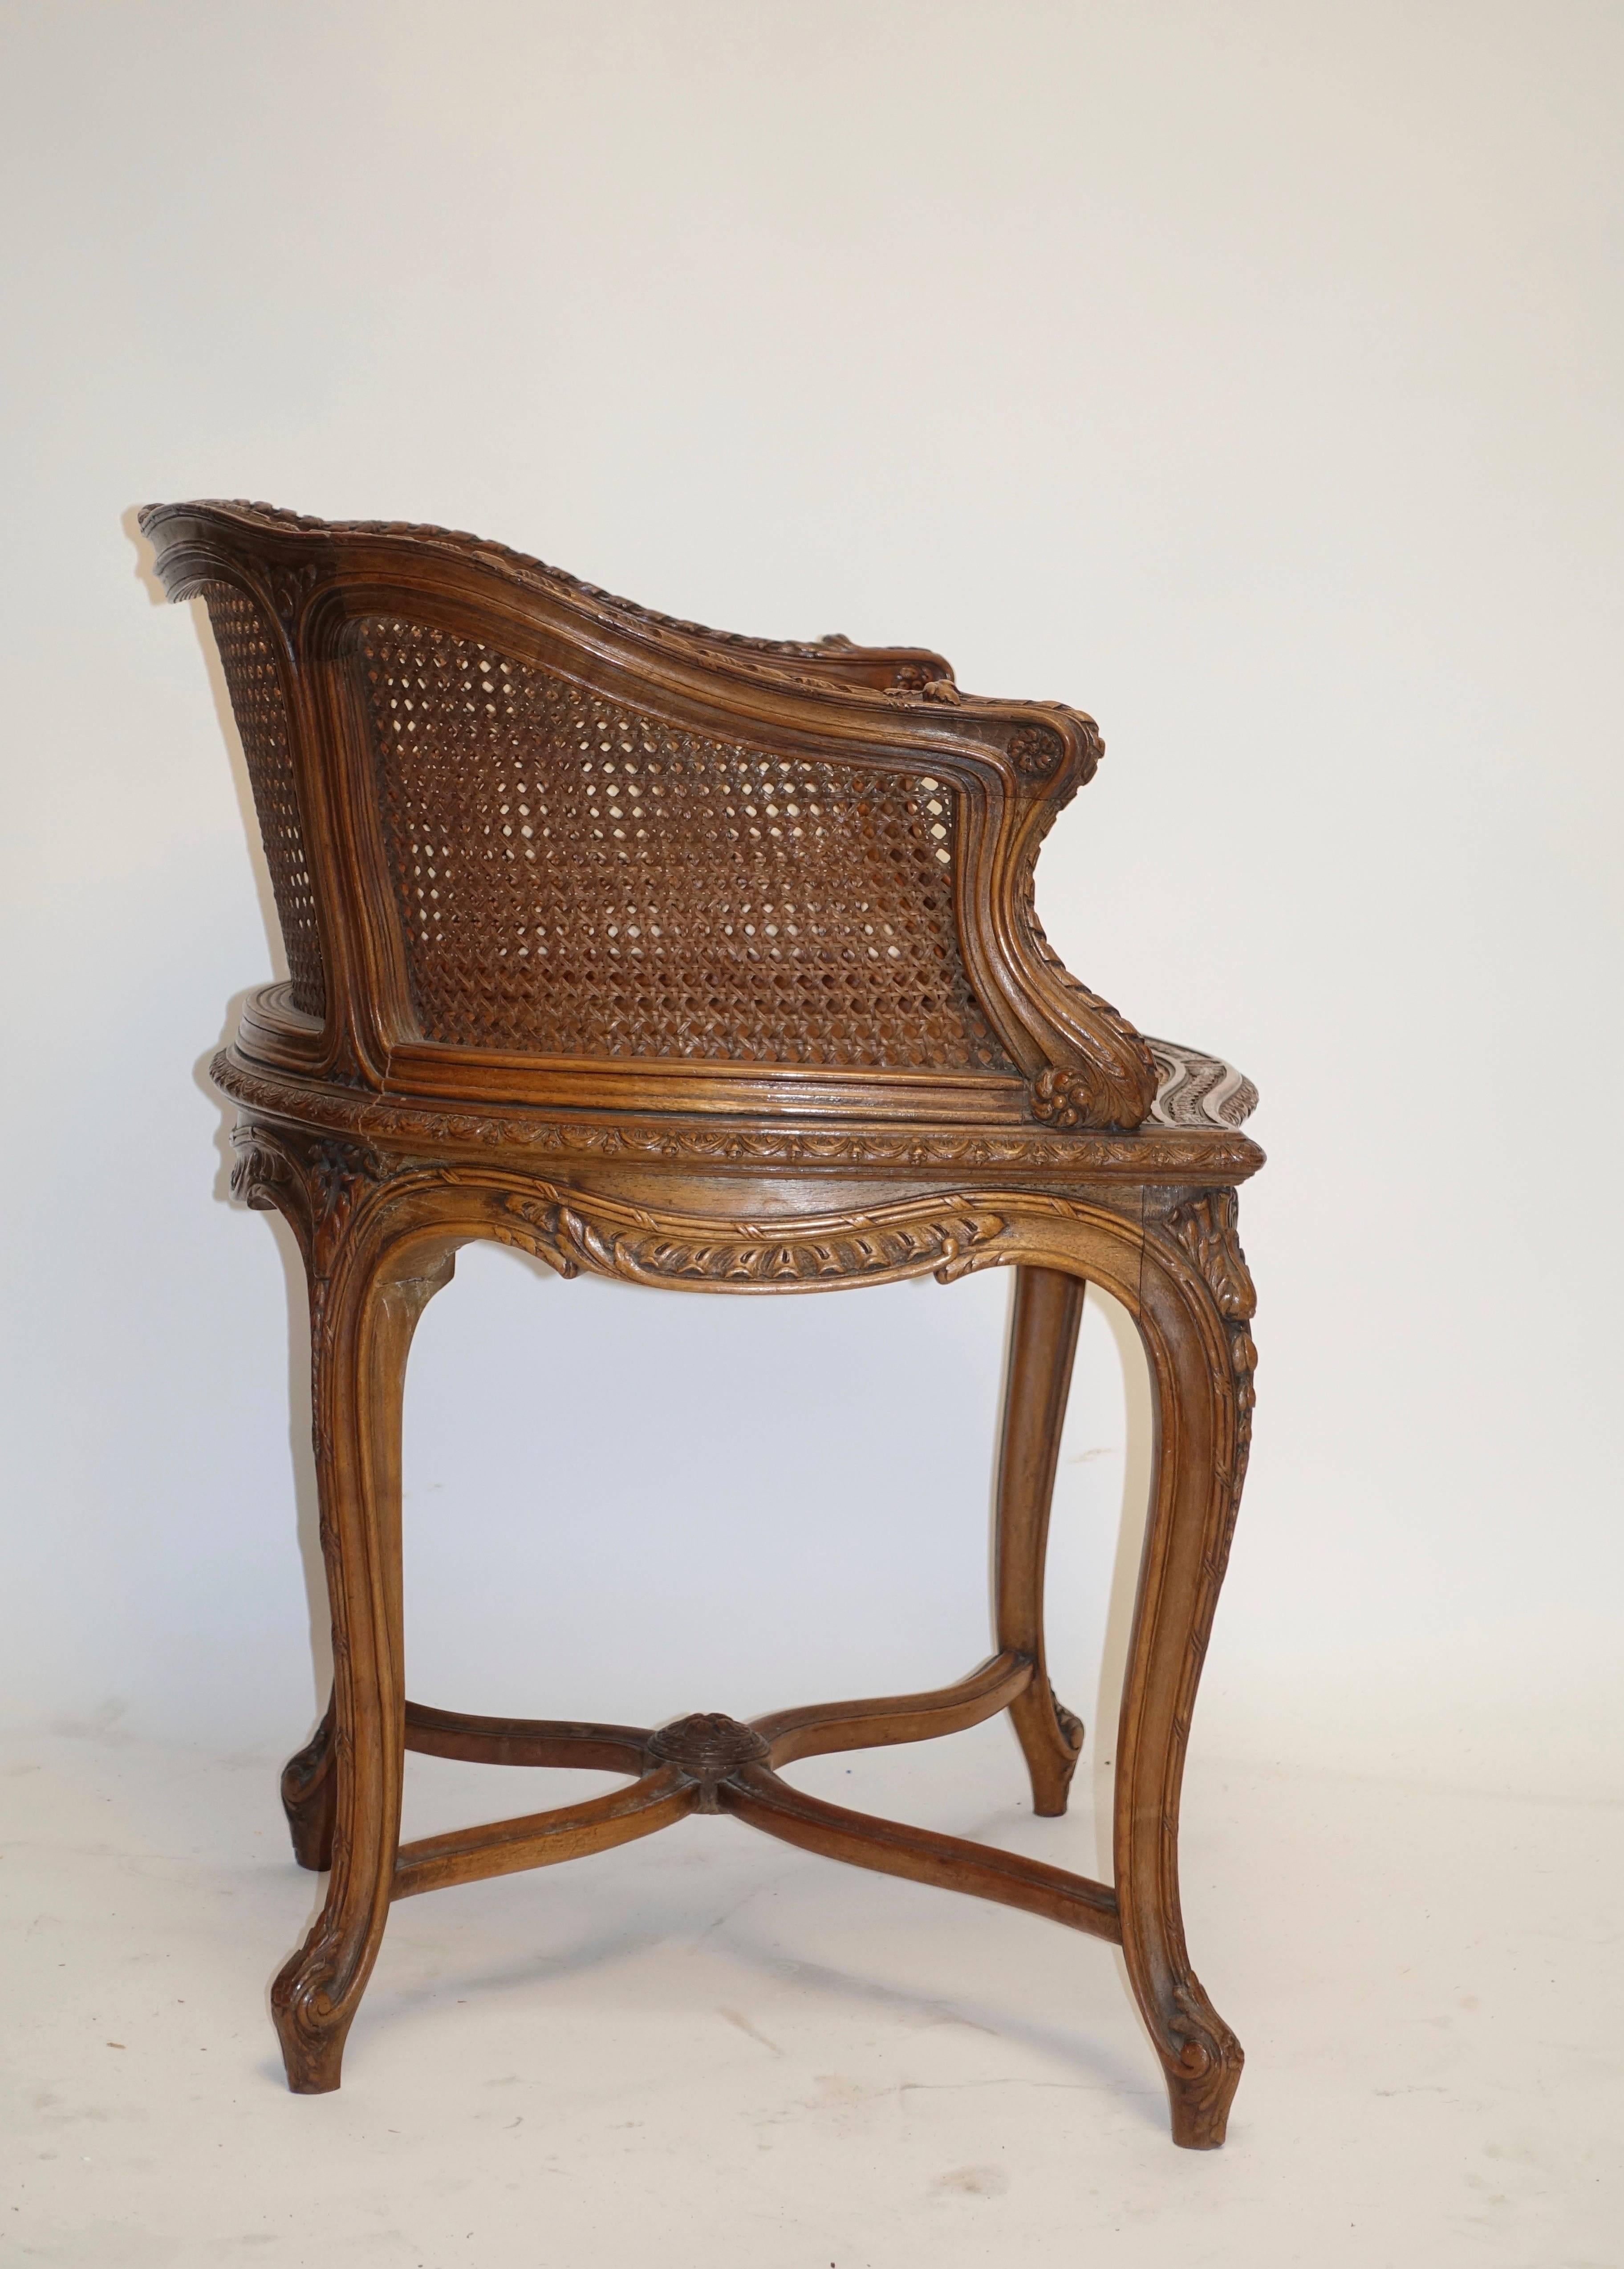 Cane Carved Walnut Vanity Dressing Table Bergere Chair, French, circa 1900